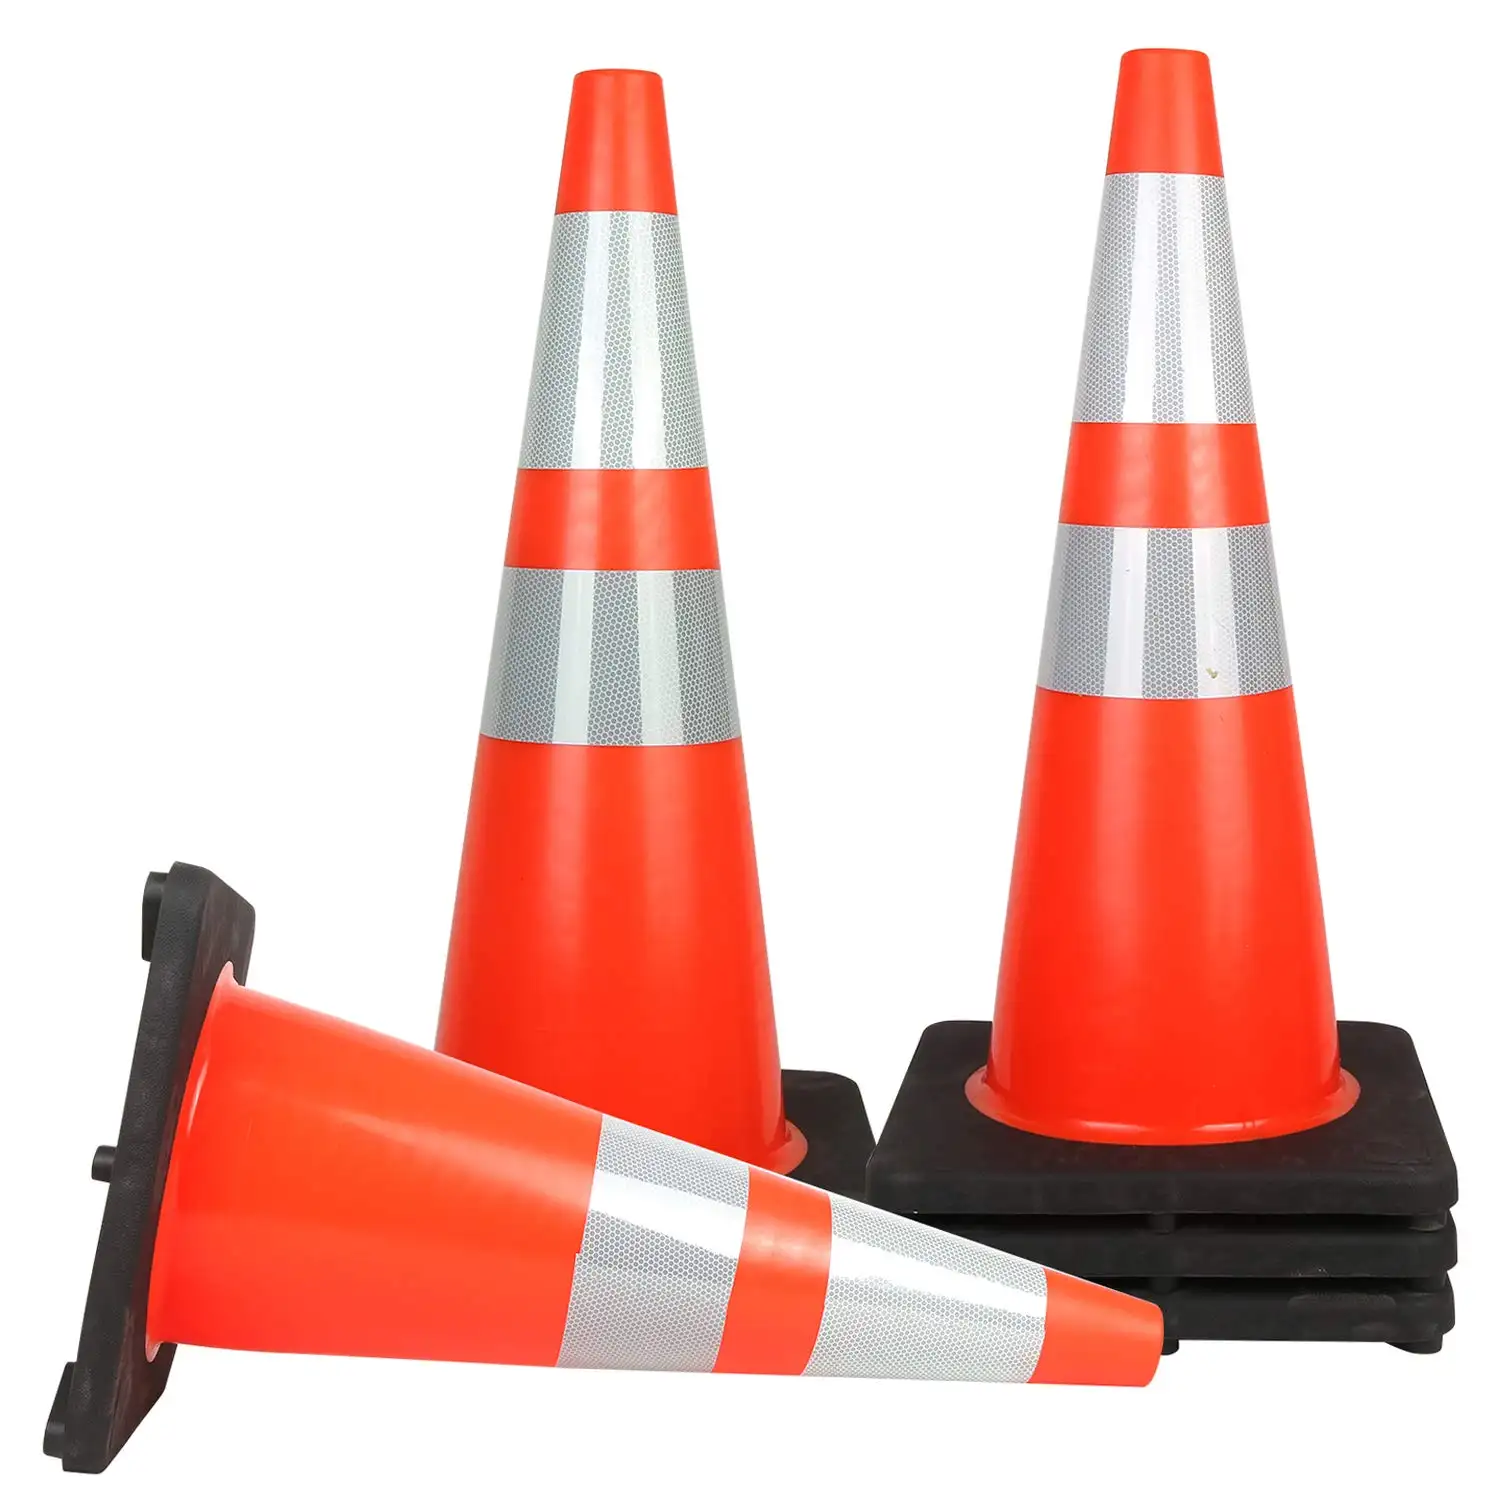 36'' height PVC traffic cone  water-resistant and durable Red body with bright reflective collars